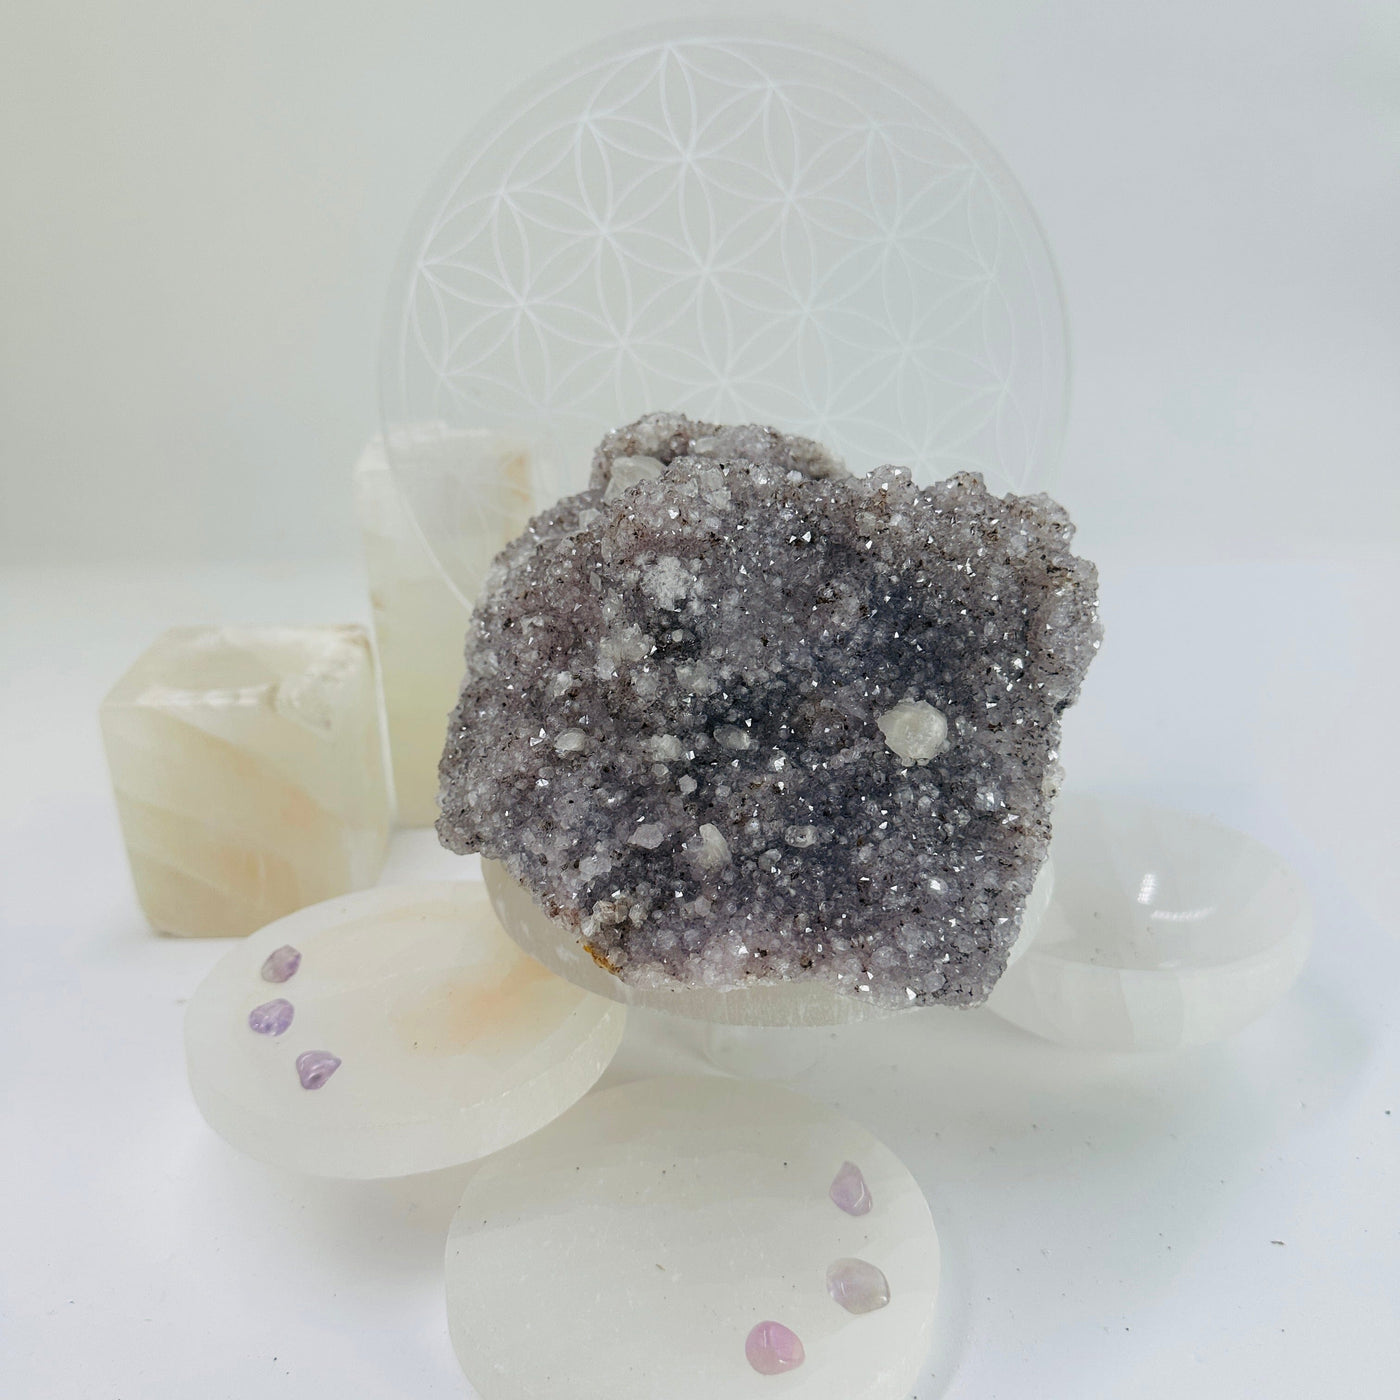 Raw Amethyst Cluster with Mica - light purple amethyst with mica and calcite side view